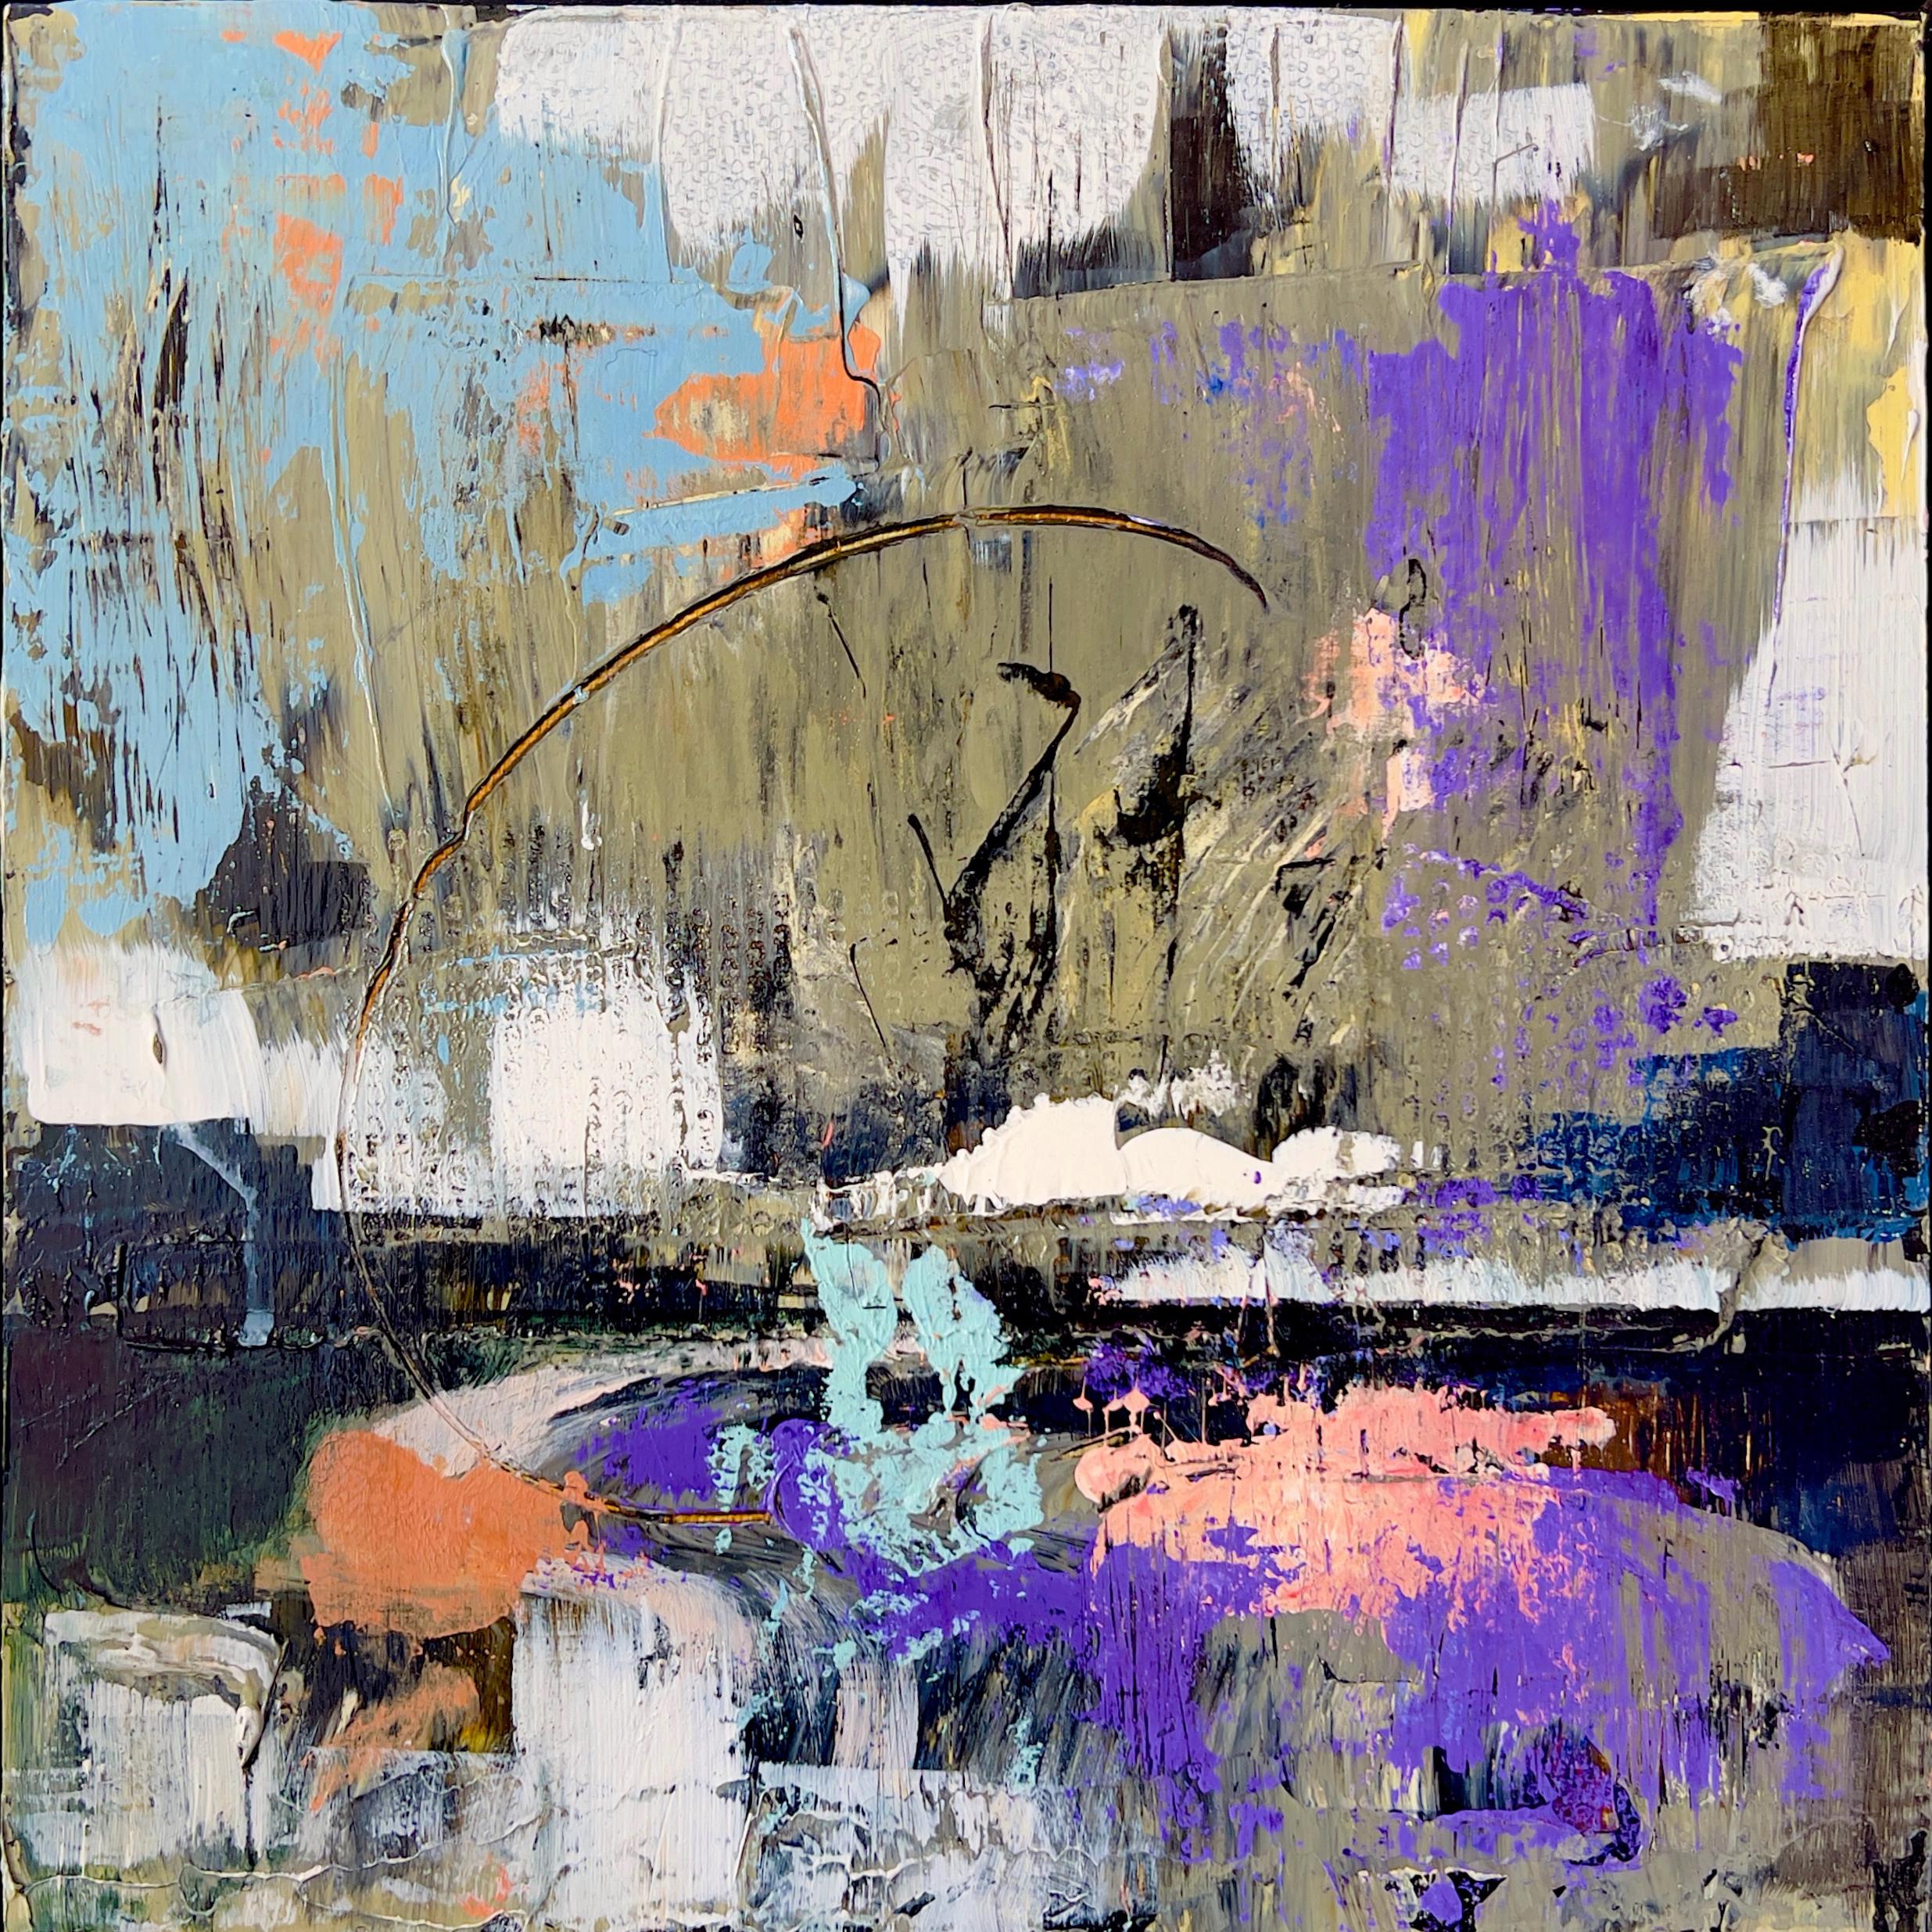 Evening at the Lake #3 - Abstract Expressionist Painting by Chaya Vance